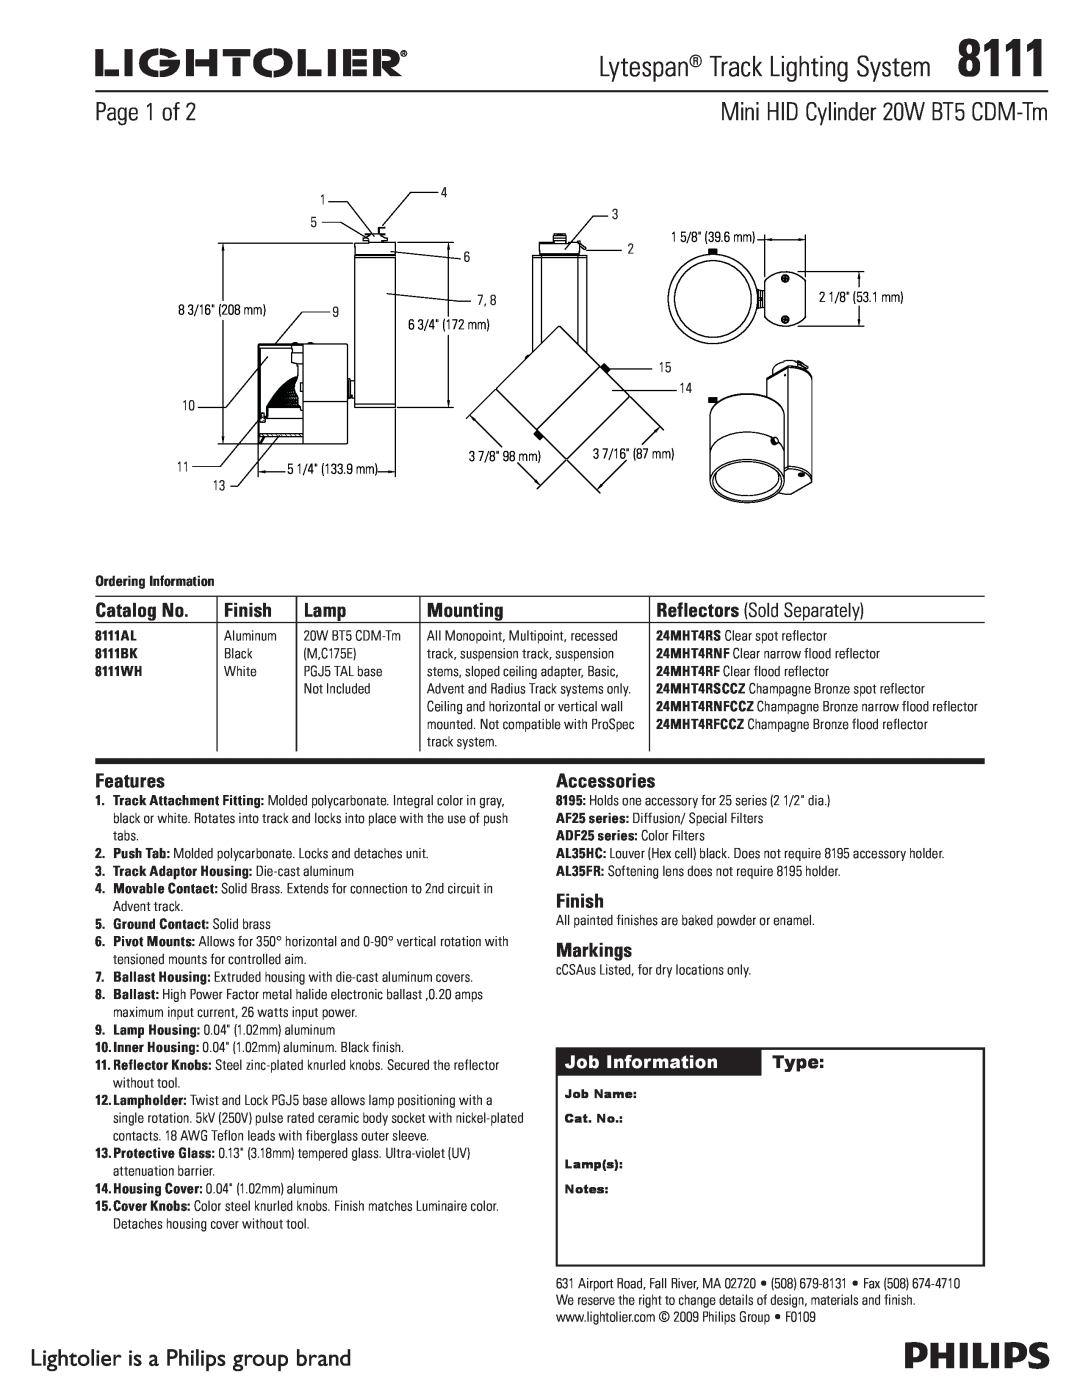 Lightolier 8111 manual Page 1 of, Mini HID Cylinder 20W BT5 CDM-Tm, Lightolier is a Philips group brand, Catalog No, Lamp 